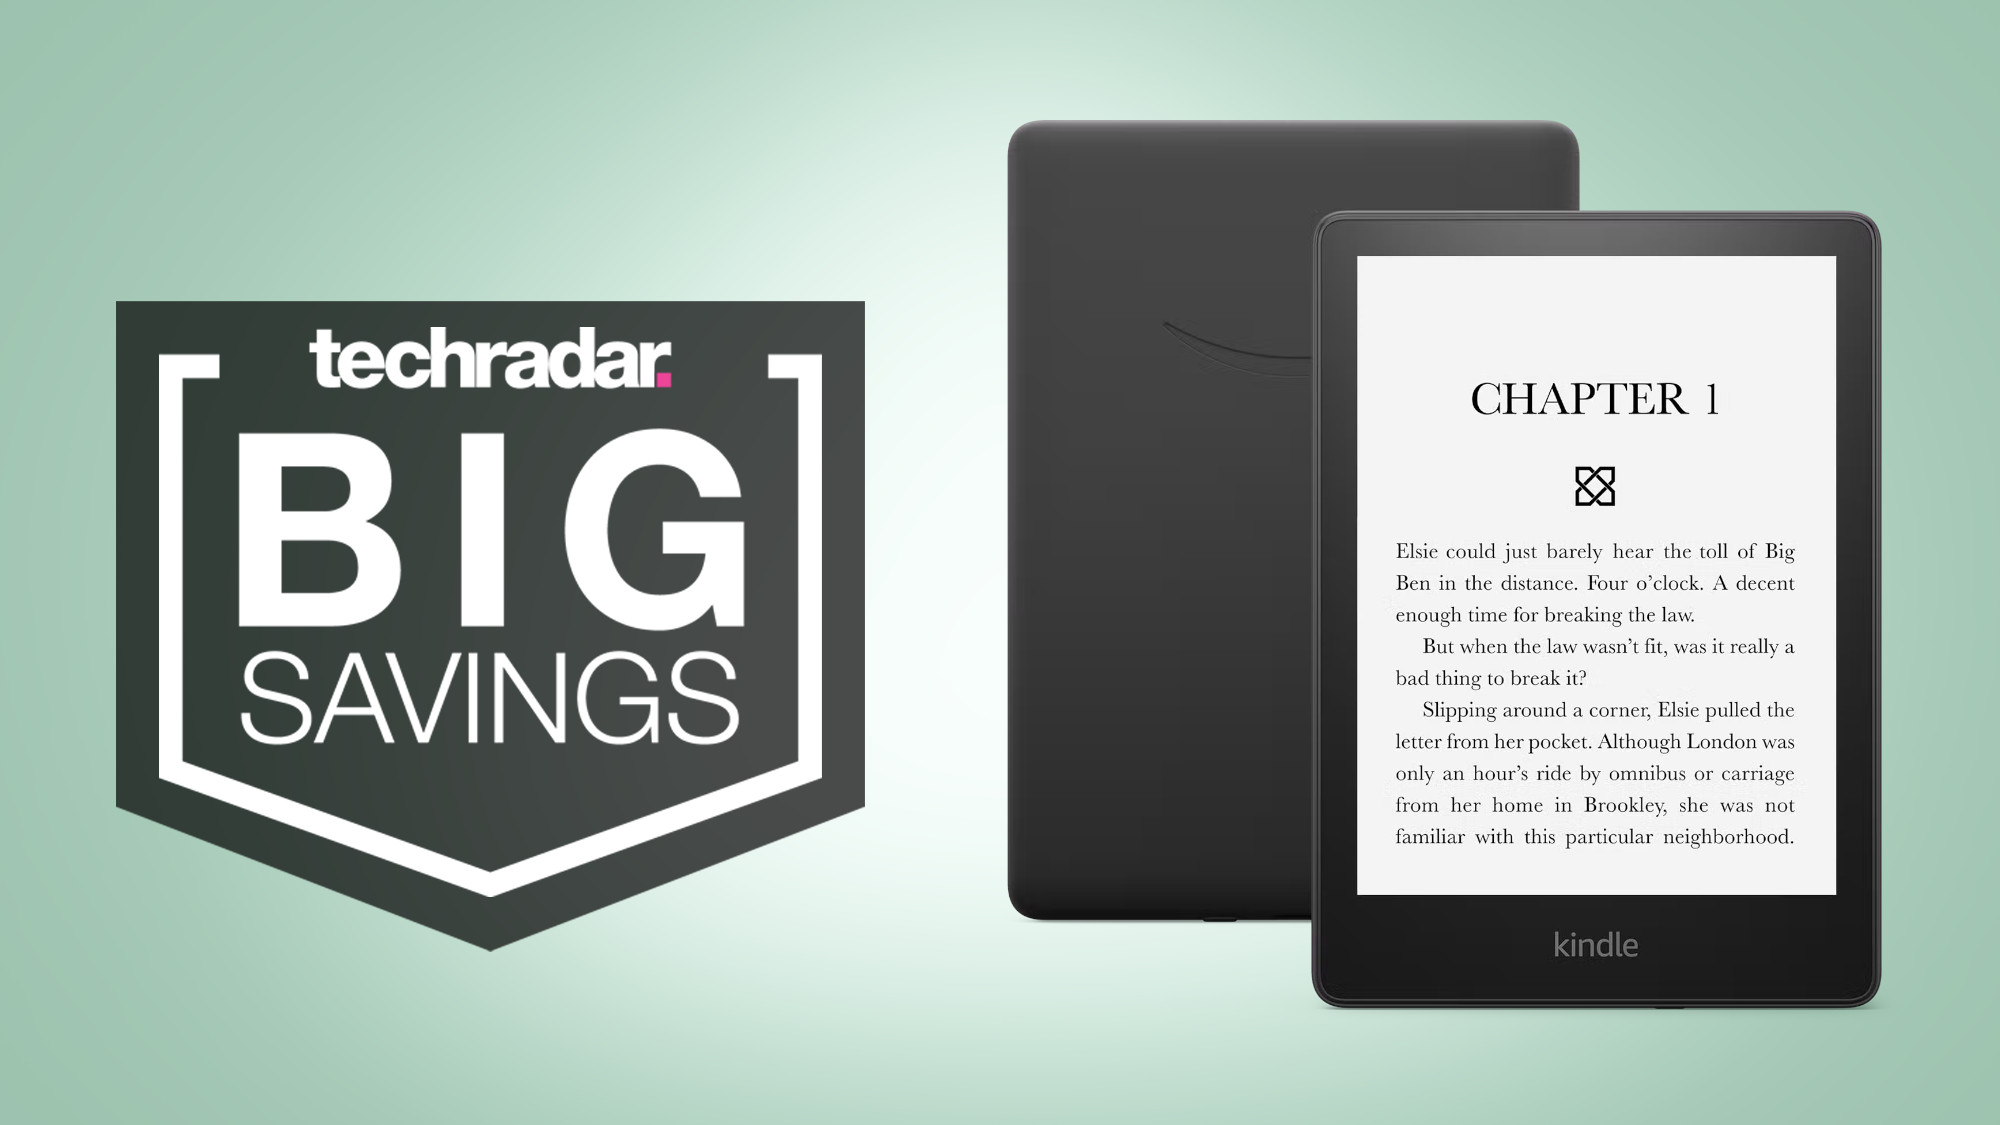 Stuck For A Mother S Day T Try This Heavily Discounted Kindle At Amazon Techradar